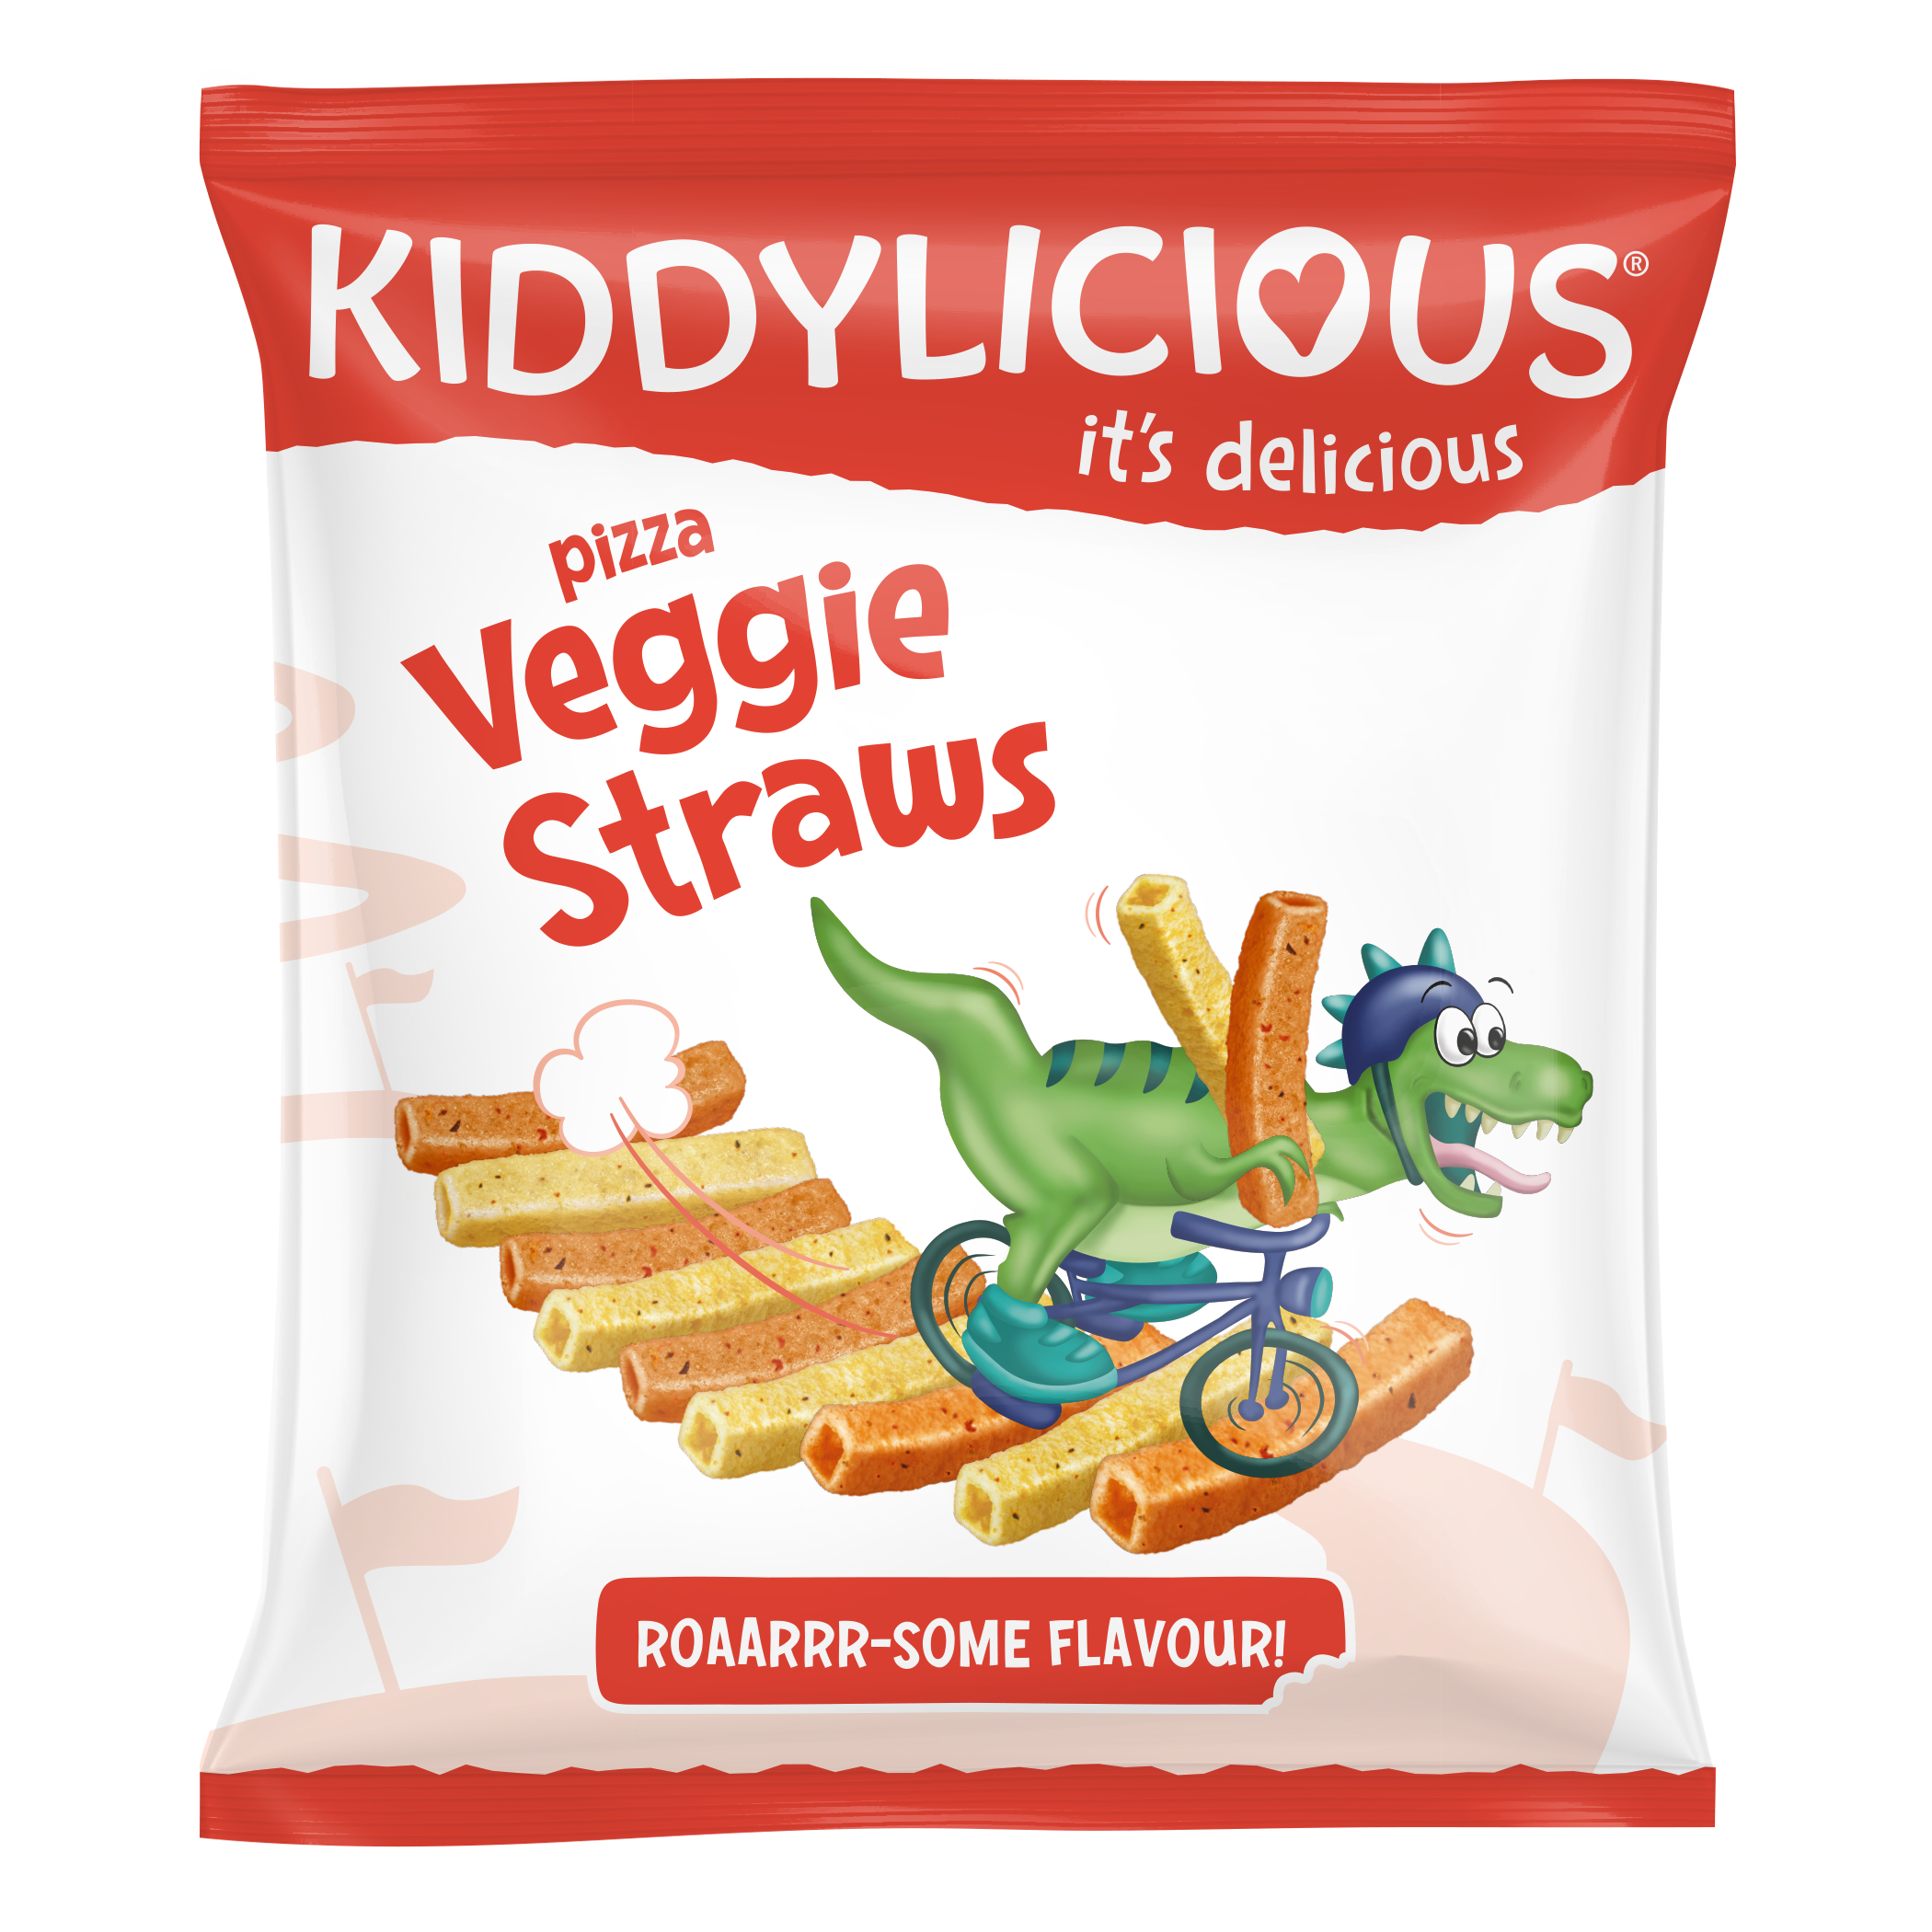 Kiddylicious Veggie Straws Pizza flavour snack single pack with dinosaur on pack